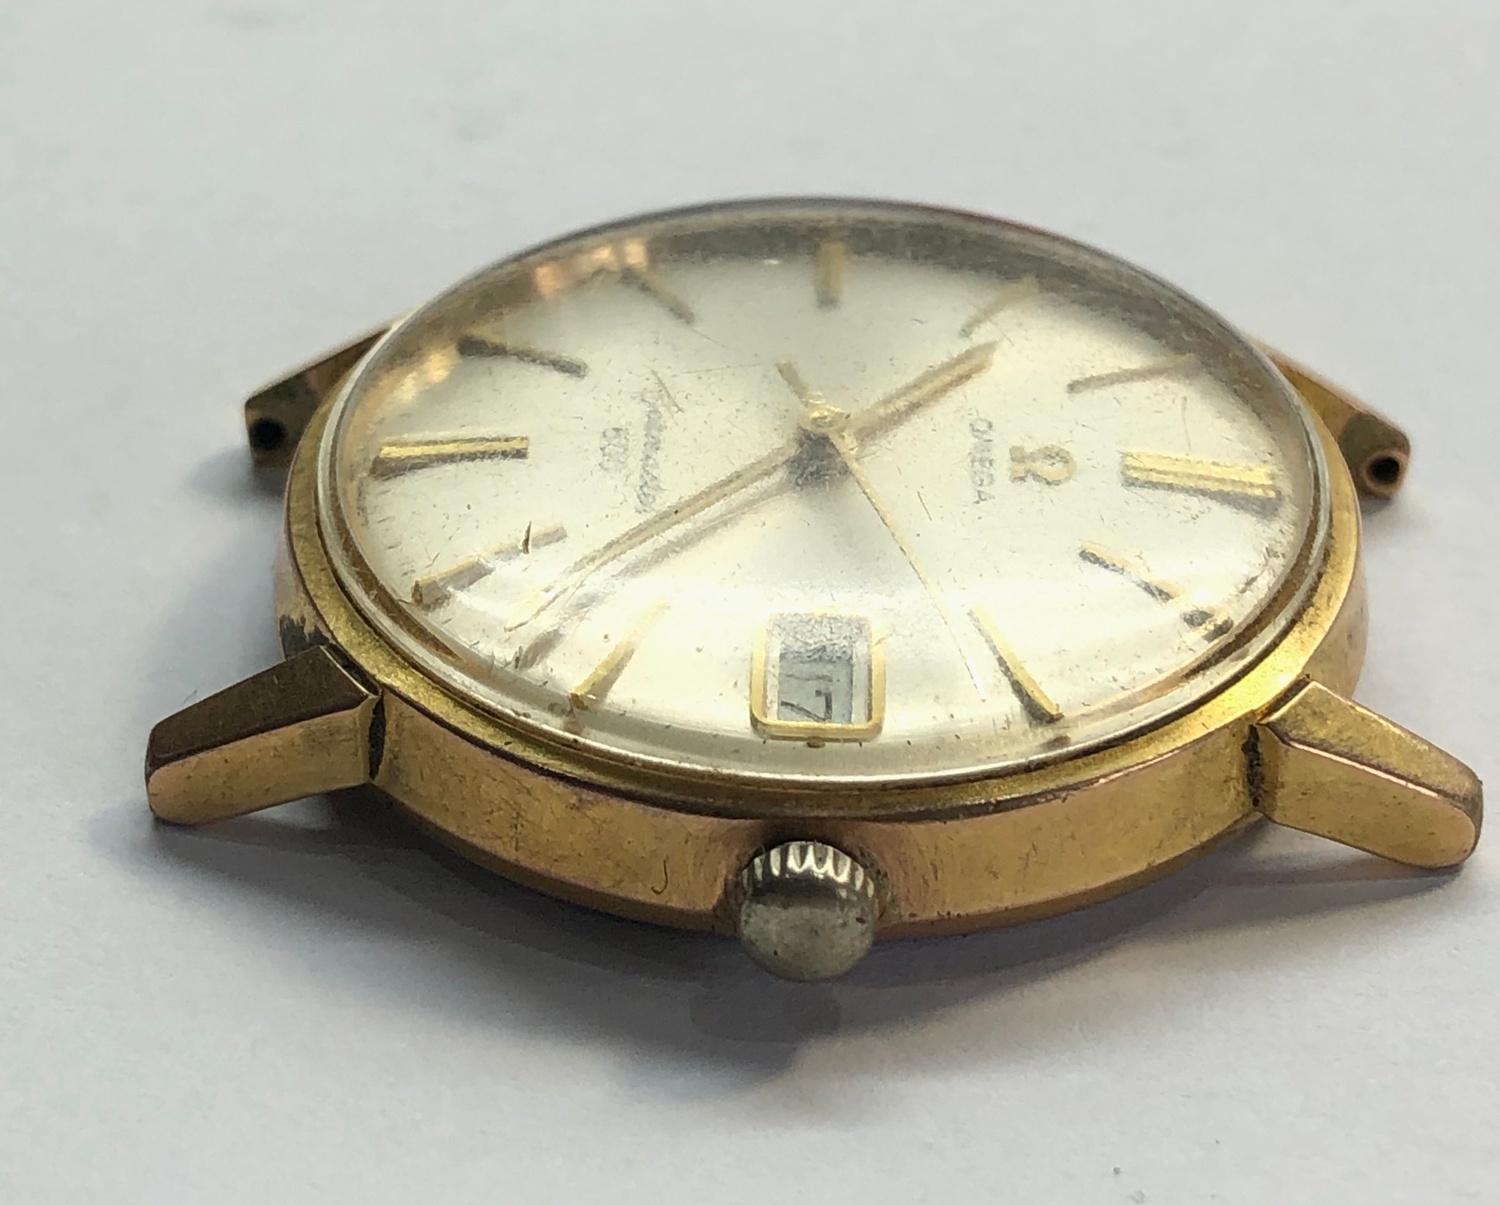 Vintage Omega seamaster 600 gents wristwatch watch has replacement winder the watch will tick but no - Image 2 of 3